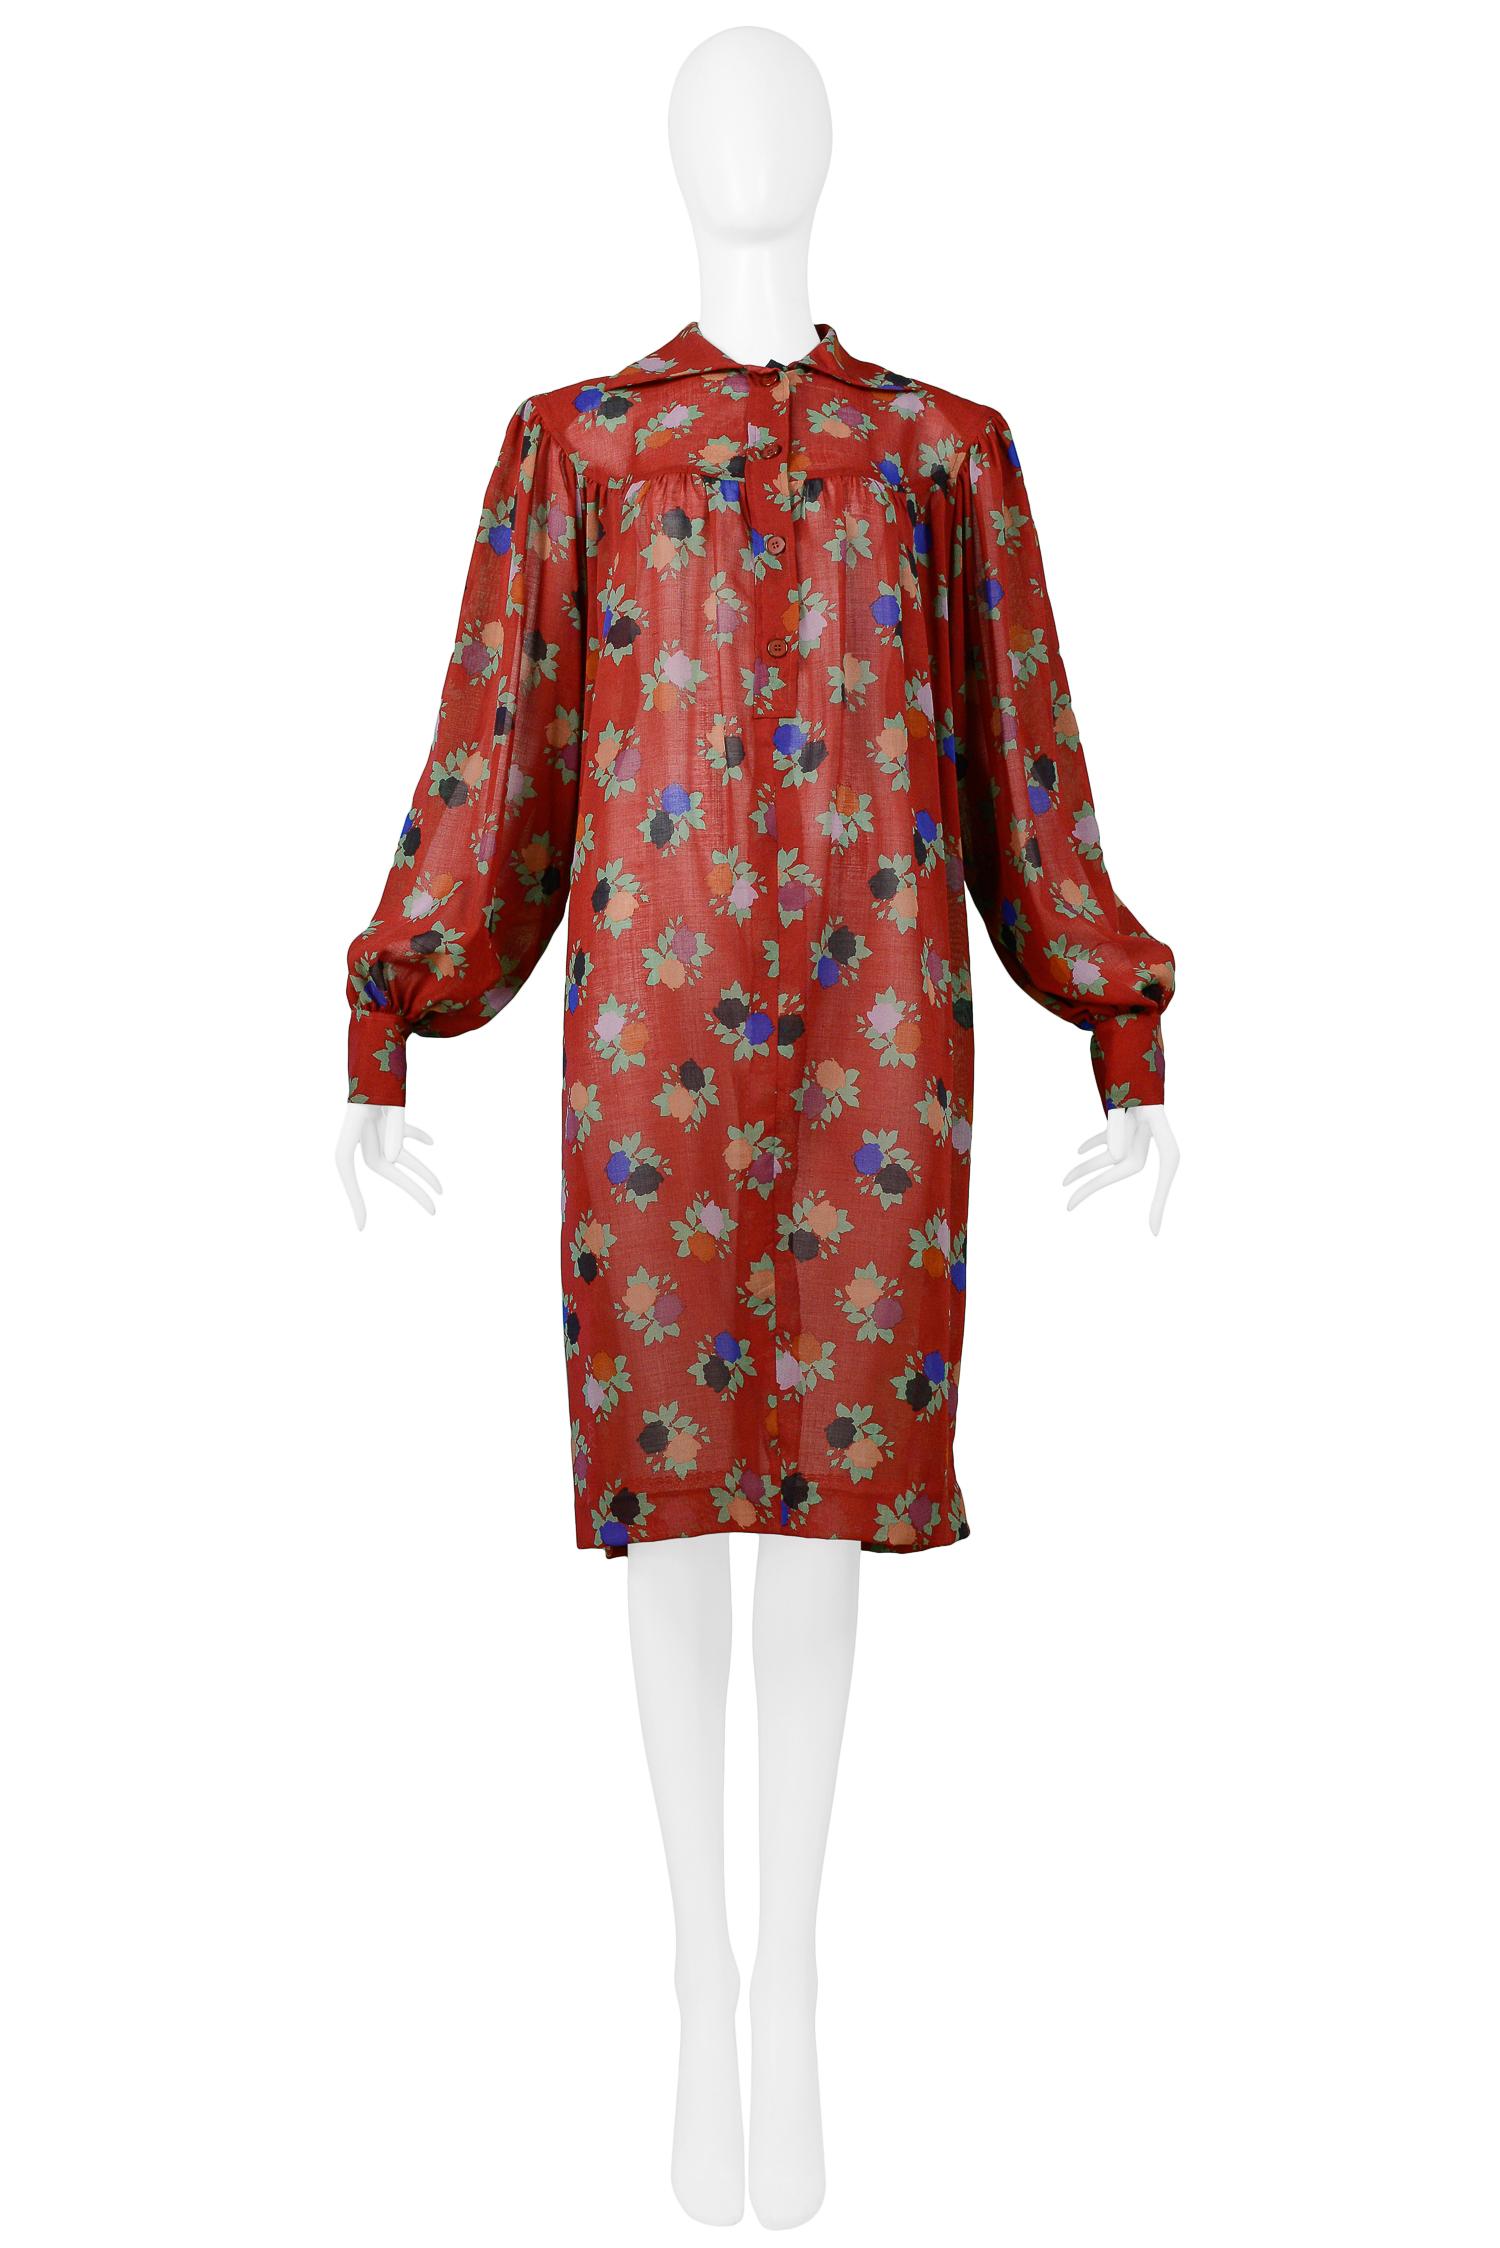 Resurrection Vintage is excited to offer a vintage Yves Saint Laurent burgundy crepe collared smock dress featuring a multi-color painted floral print, blouson sleeves with button cuffs and front button closure.

Yves Saint Laurent
Size